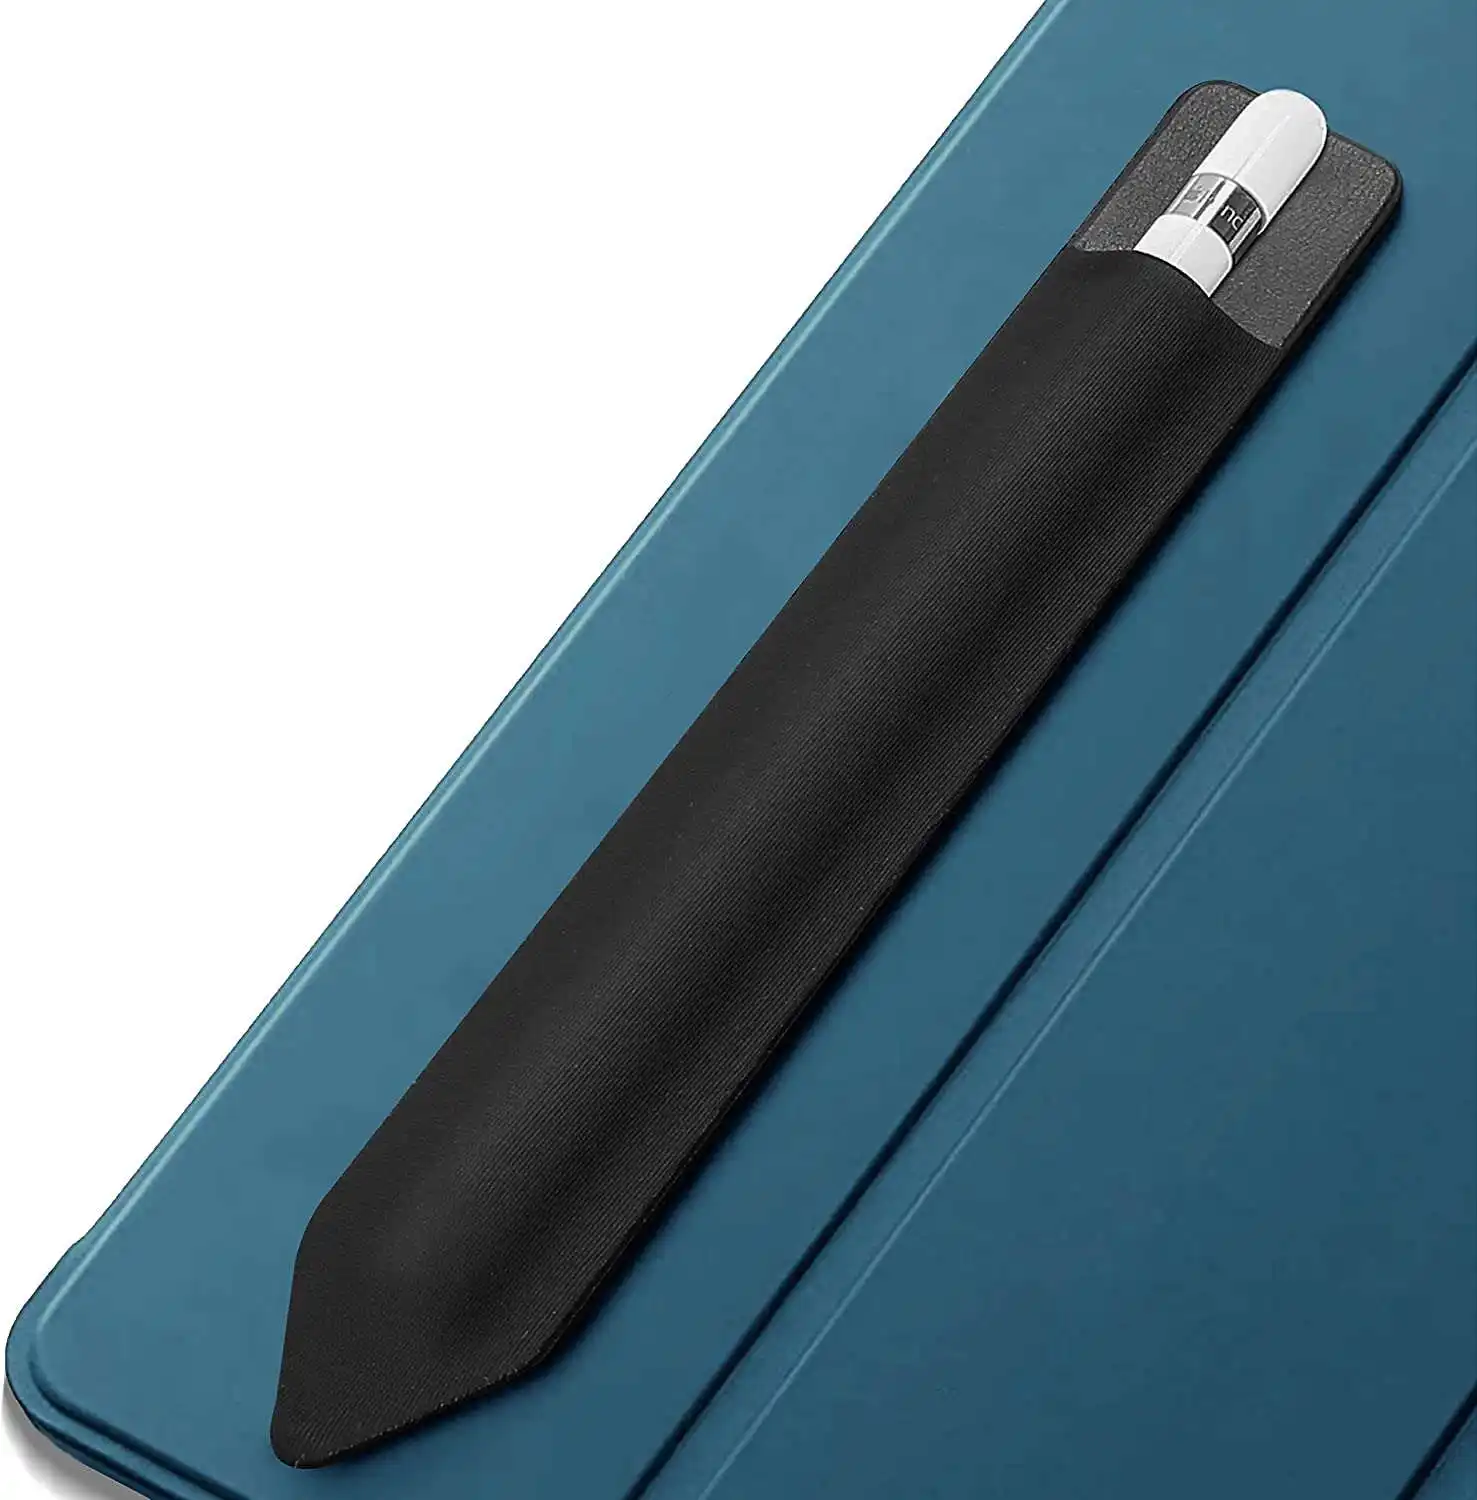 Pad Cover Back Self Stick Pouch Bad Brand 2 in1 Kapazitive Touchscreens Magnetic Universal Stylus Pen Pencil Case mit Sticky